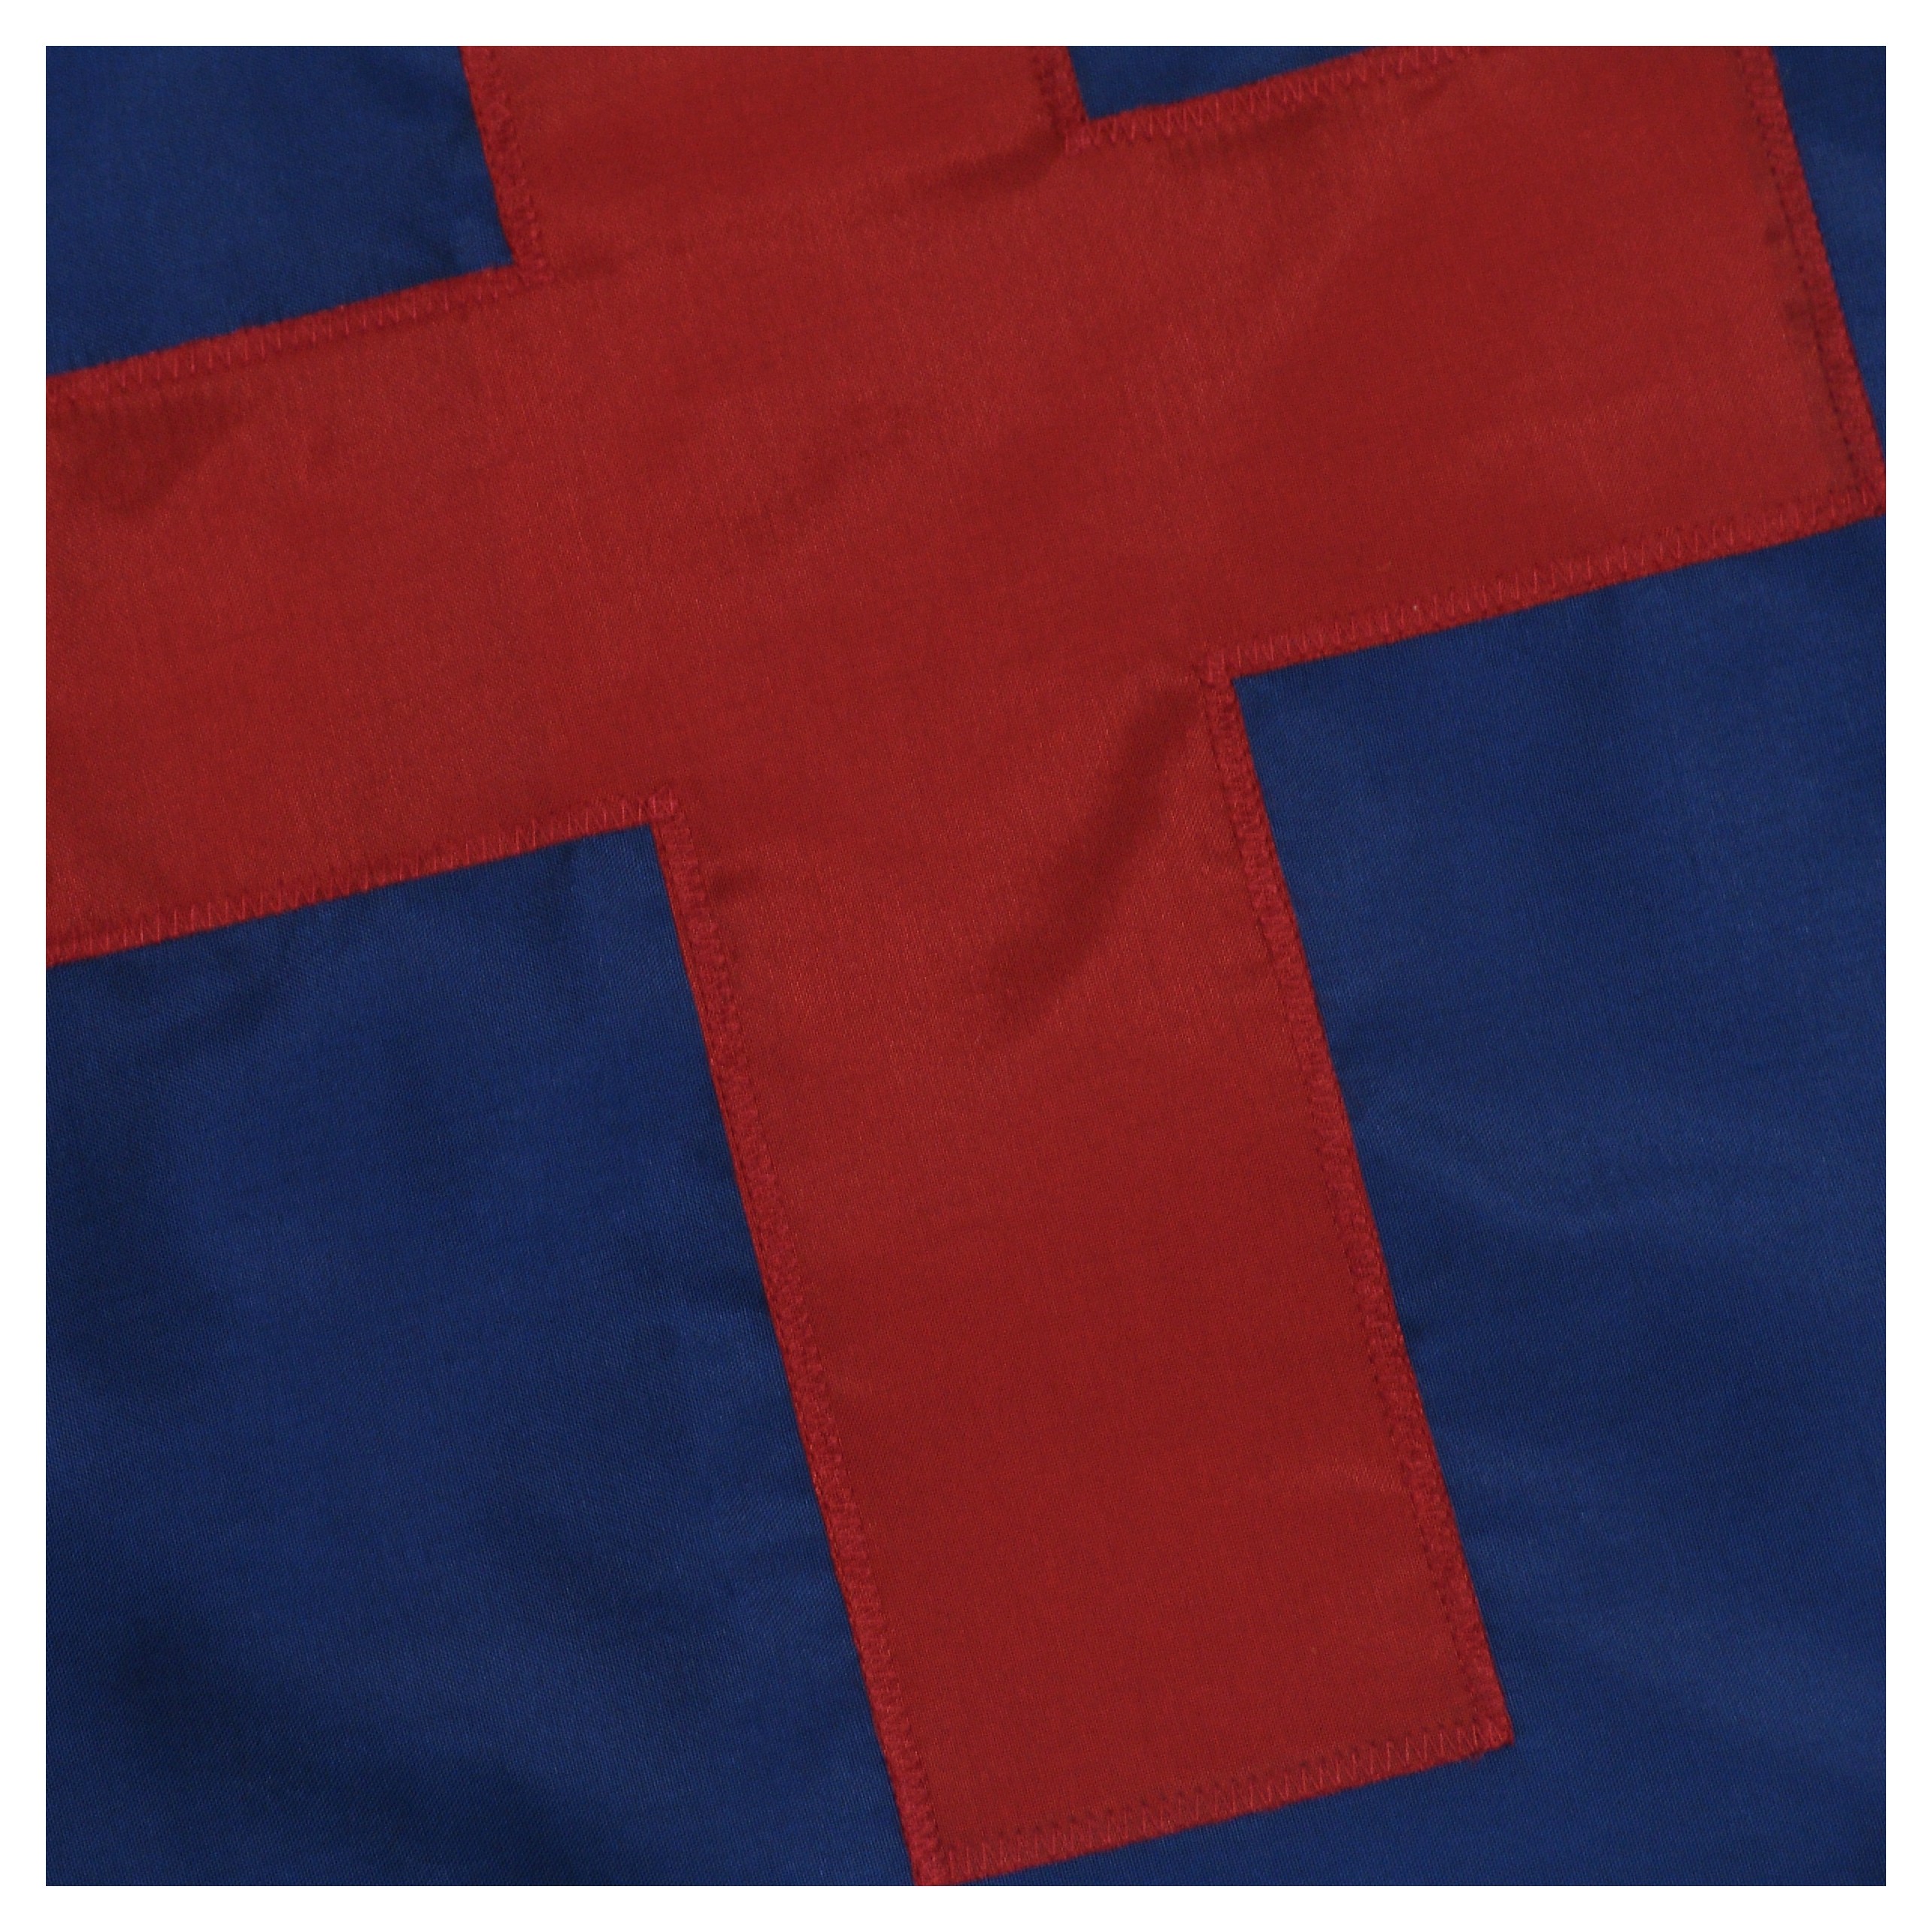 free clip art of the christian flag - photo #8